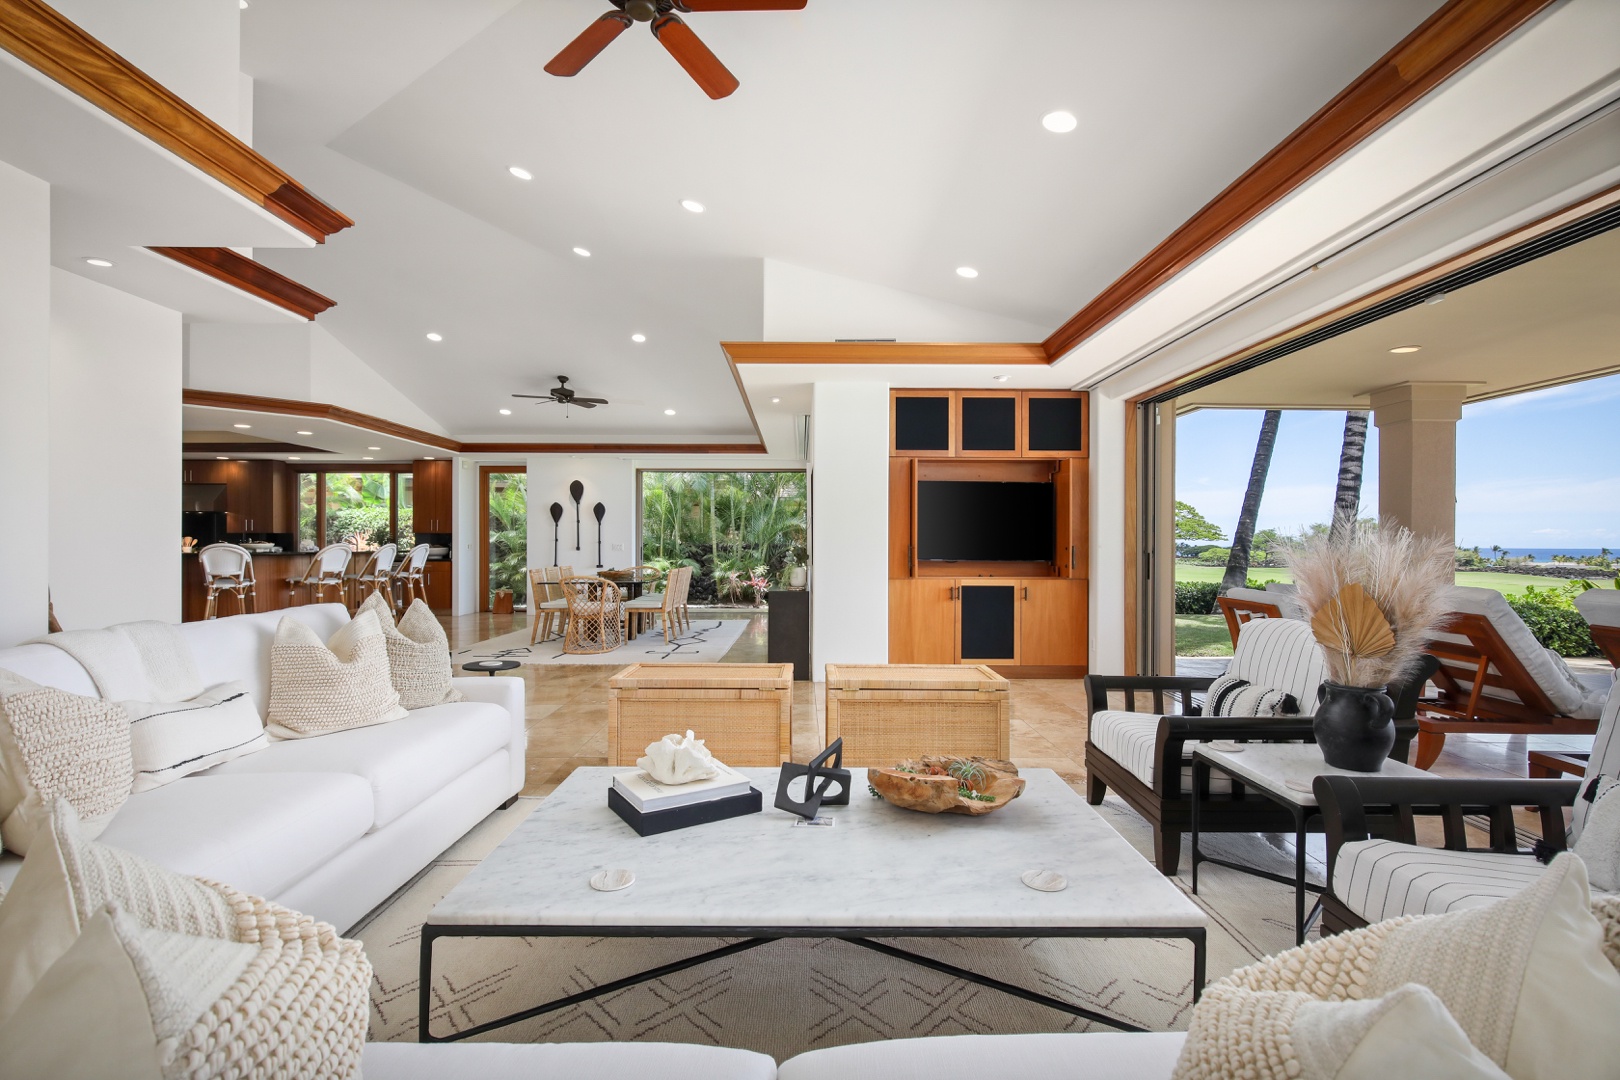 Kailua Kona Vacation Rentals, 4BD Pakui Street (147) Estate Home at Four Seasons Resort at Hualalai - Living room with elegant seating, built in entertainment system, view of the pool deck & ocean beyond.